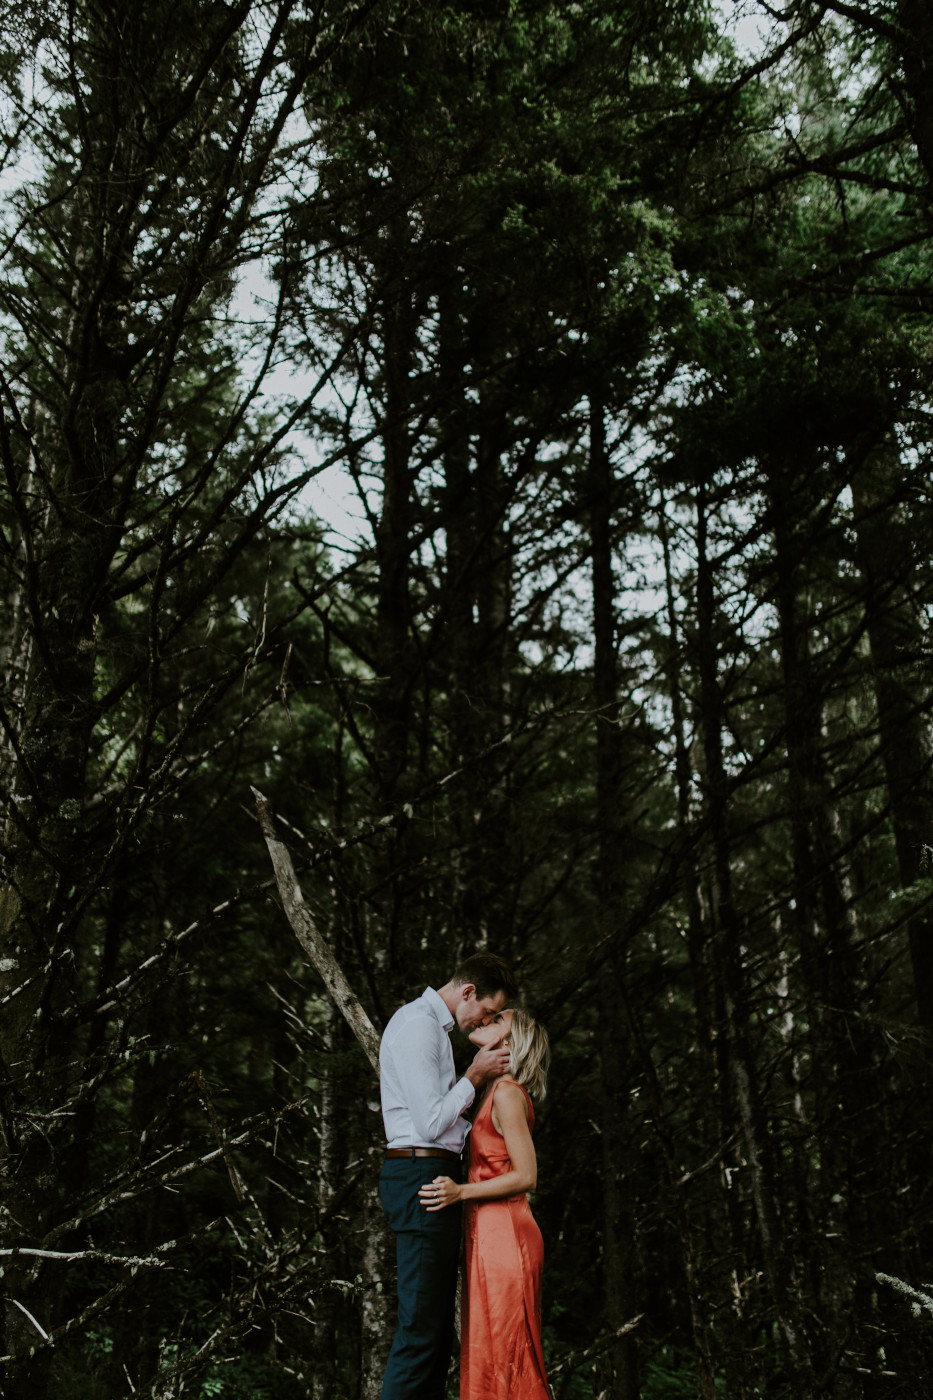 Chelsey and Billy kiss in front of the trees. Elopement wedding photography at Cannon Beach by Sienna Plus Josh.